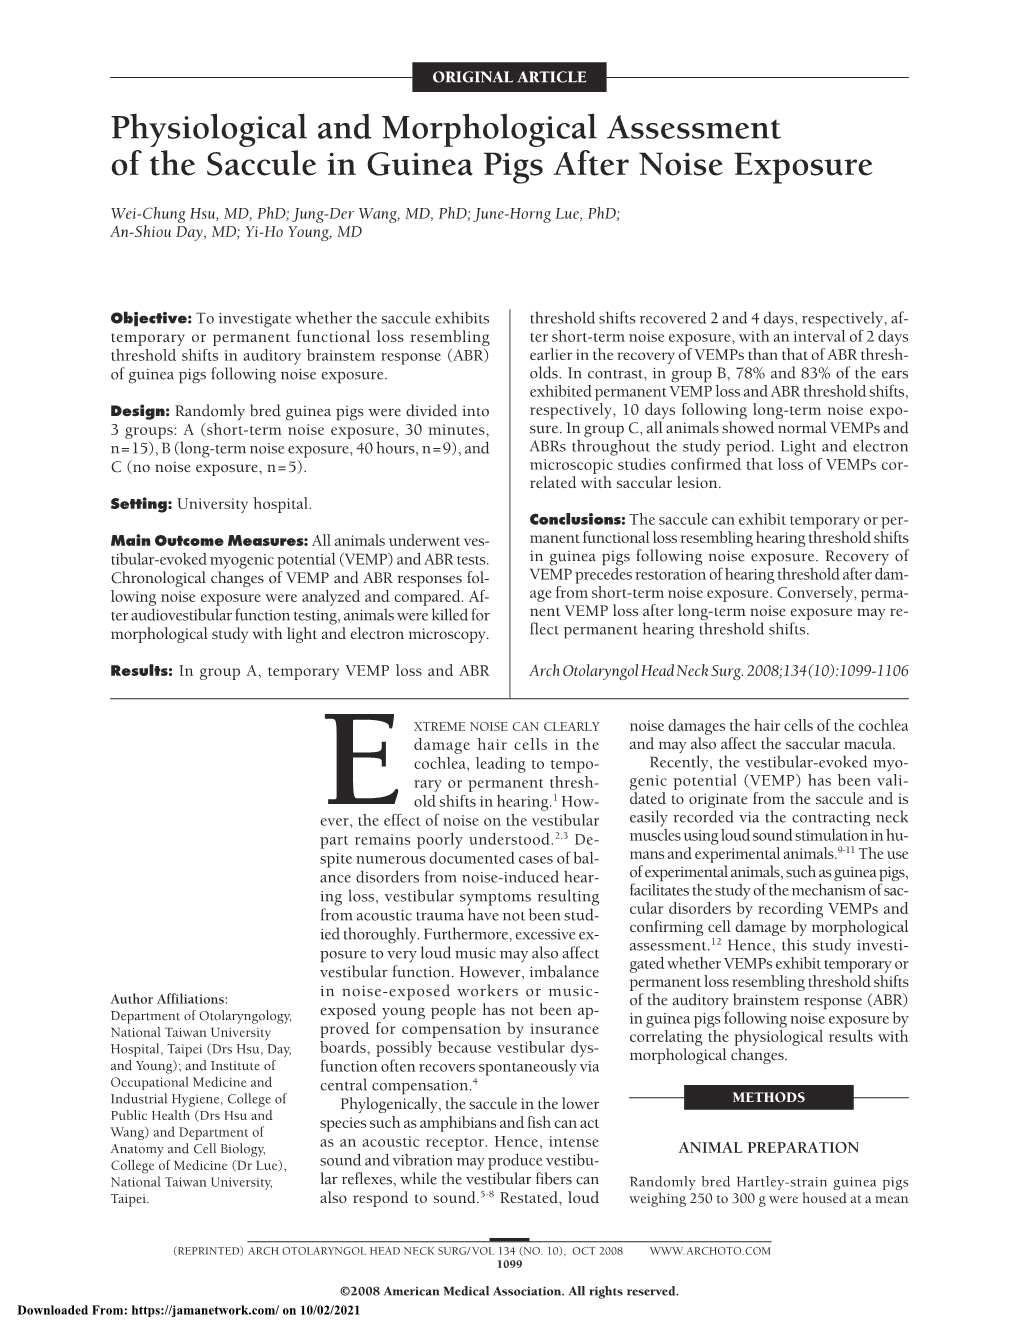 Physiological and Morphological Assessment of the Saccule in Guinea Pigs After Noise Exposure